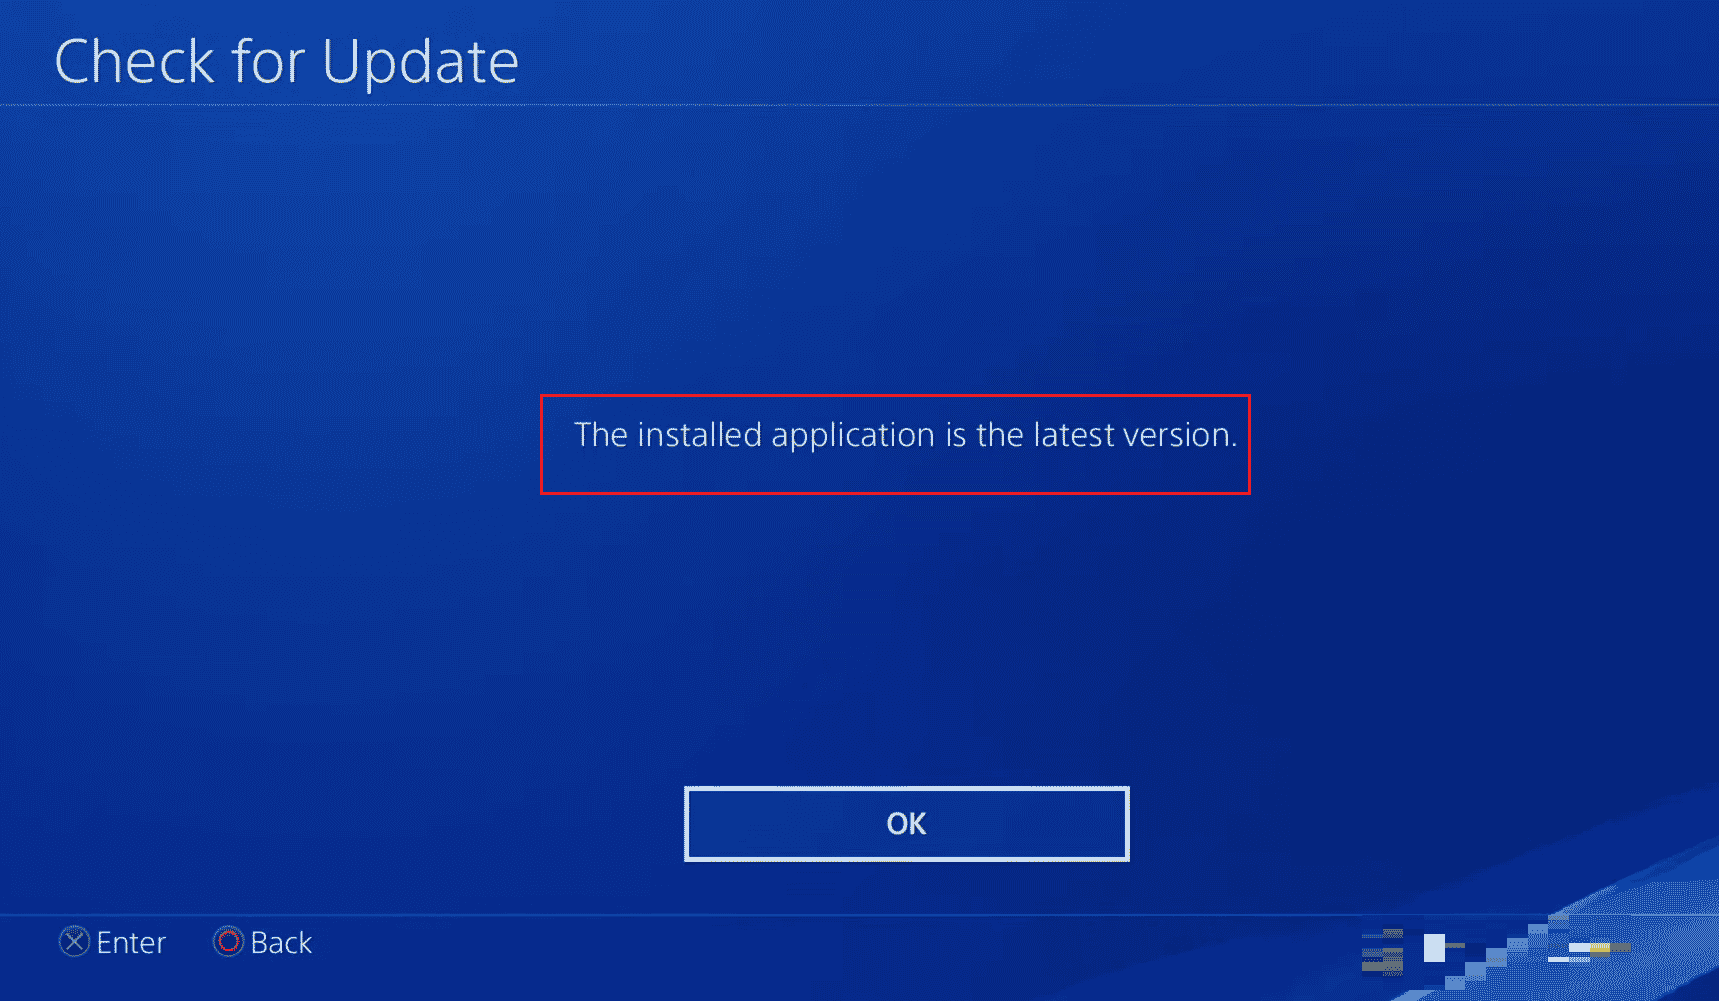 The installed application is the latest version PS4